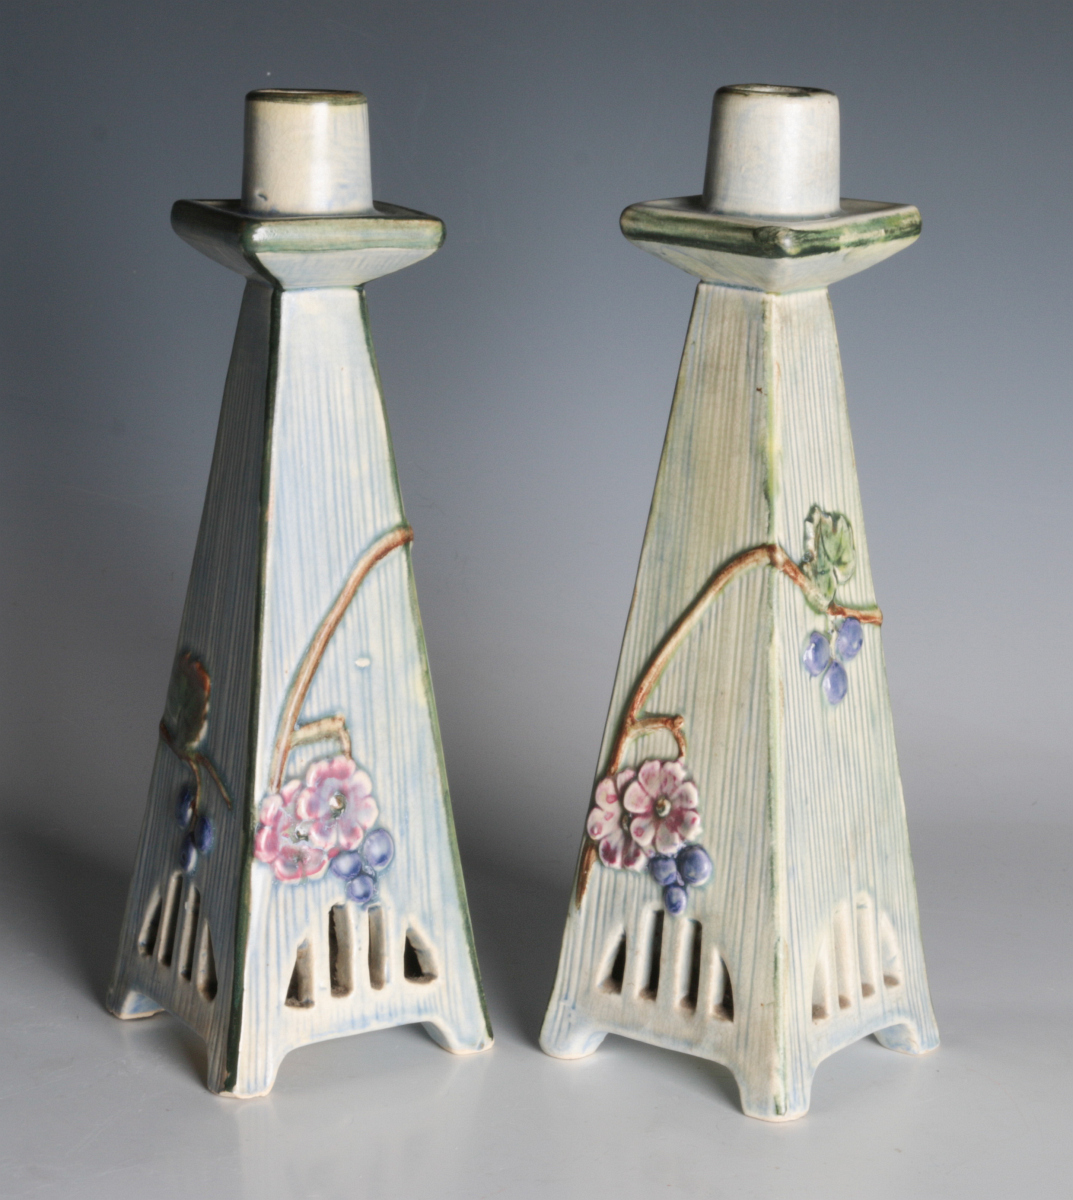 PAIR OF WELLER 'KLYRO' ART POTTERY CANDLE HOLDERS